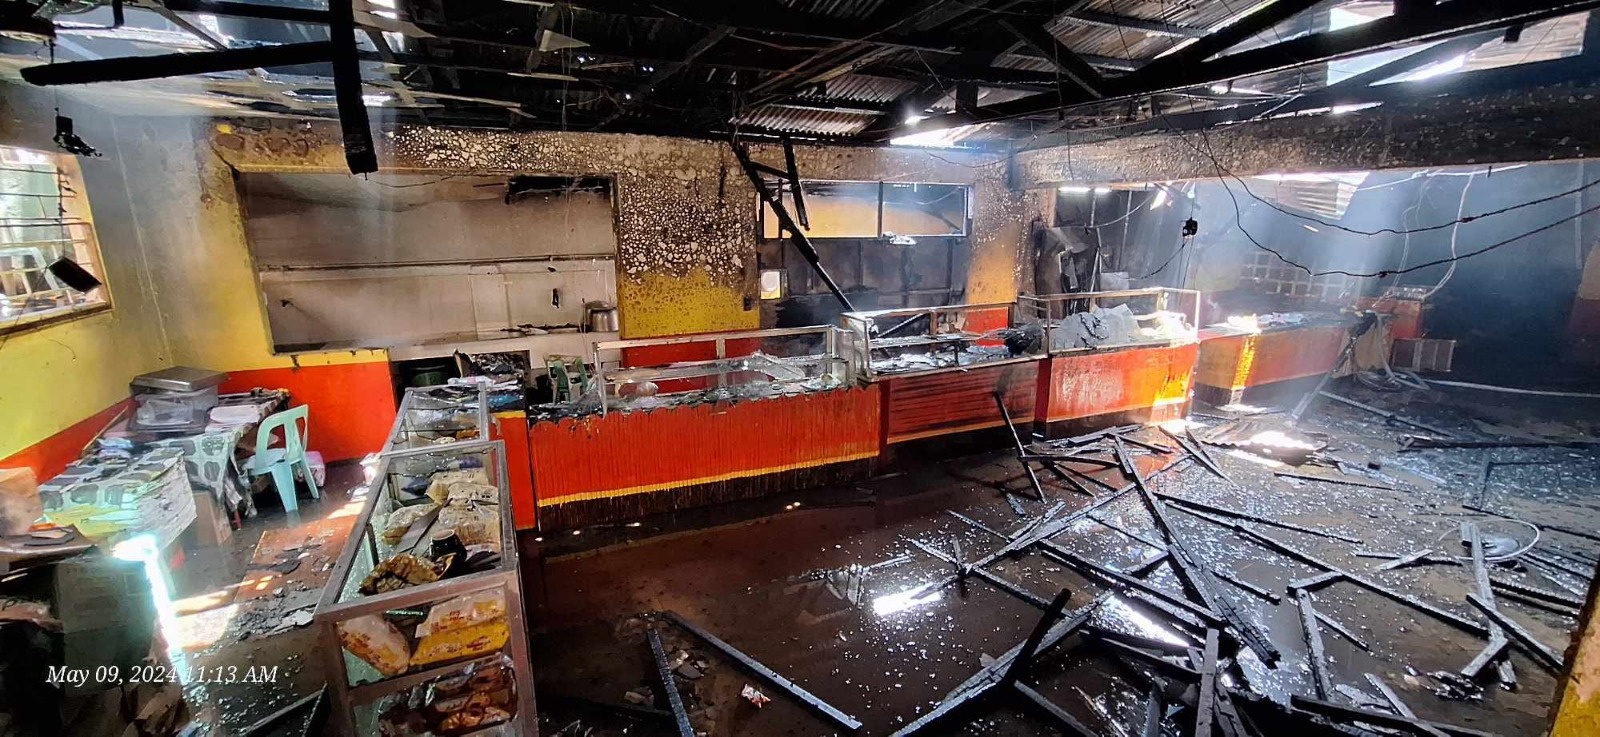 A fire broke out in the canteen of Ernesto Rondon High School in Project 6, Quezon City on Thursday morning. (